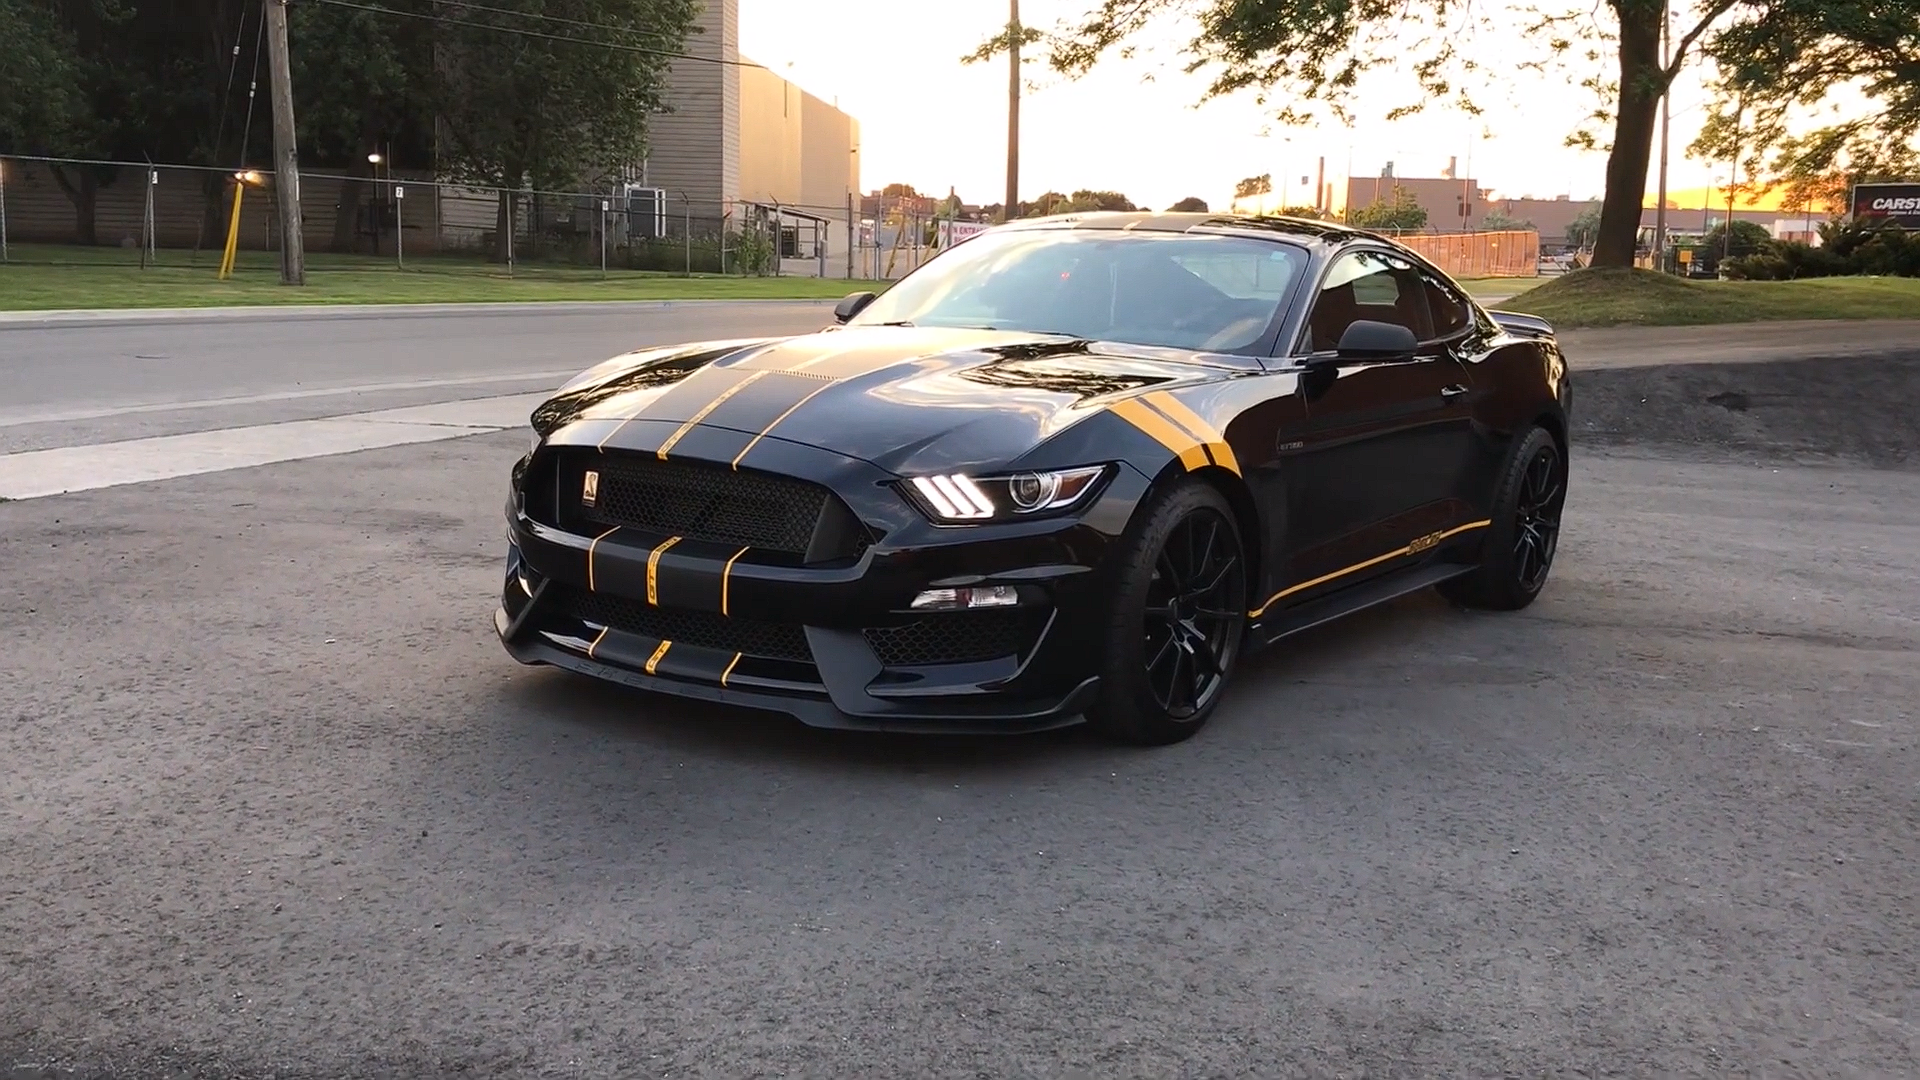 Sleek Shelby Mustang GT350 With Custom Stripes